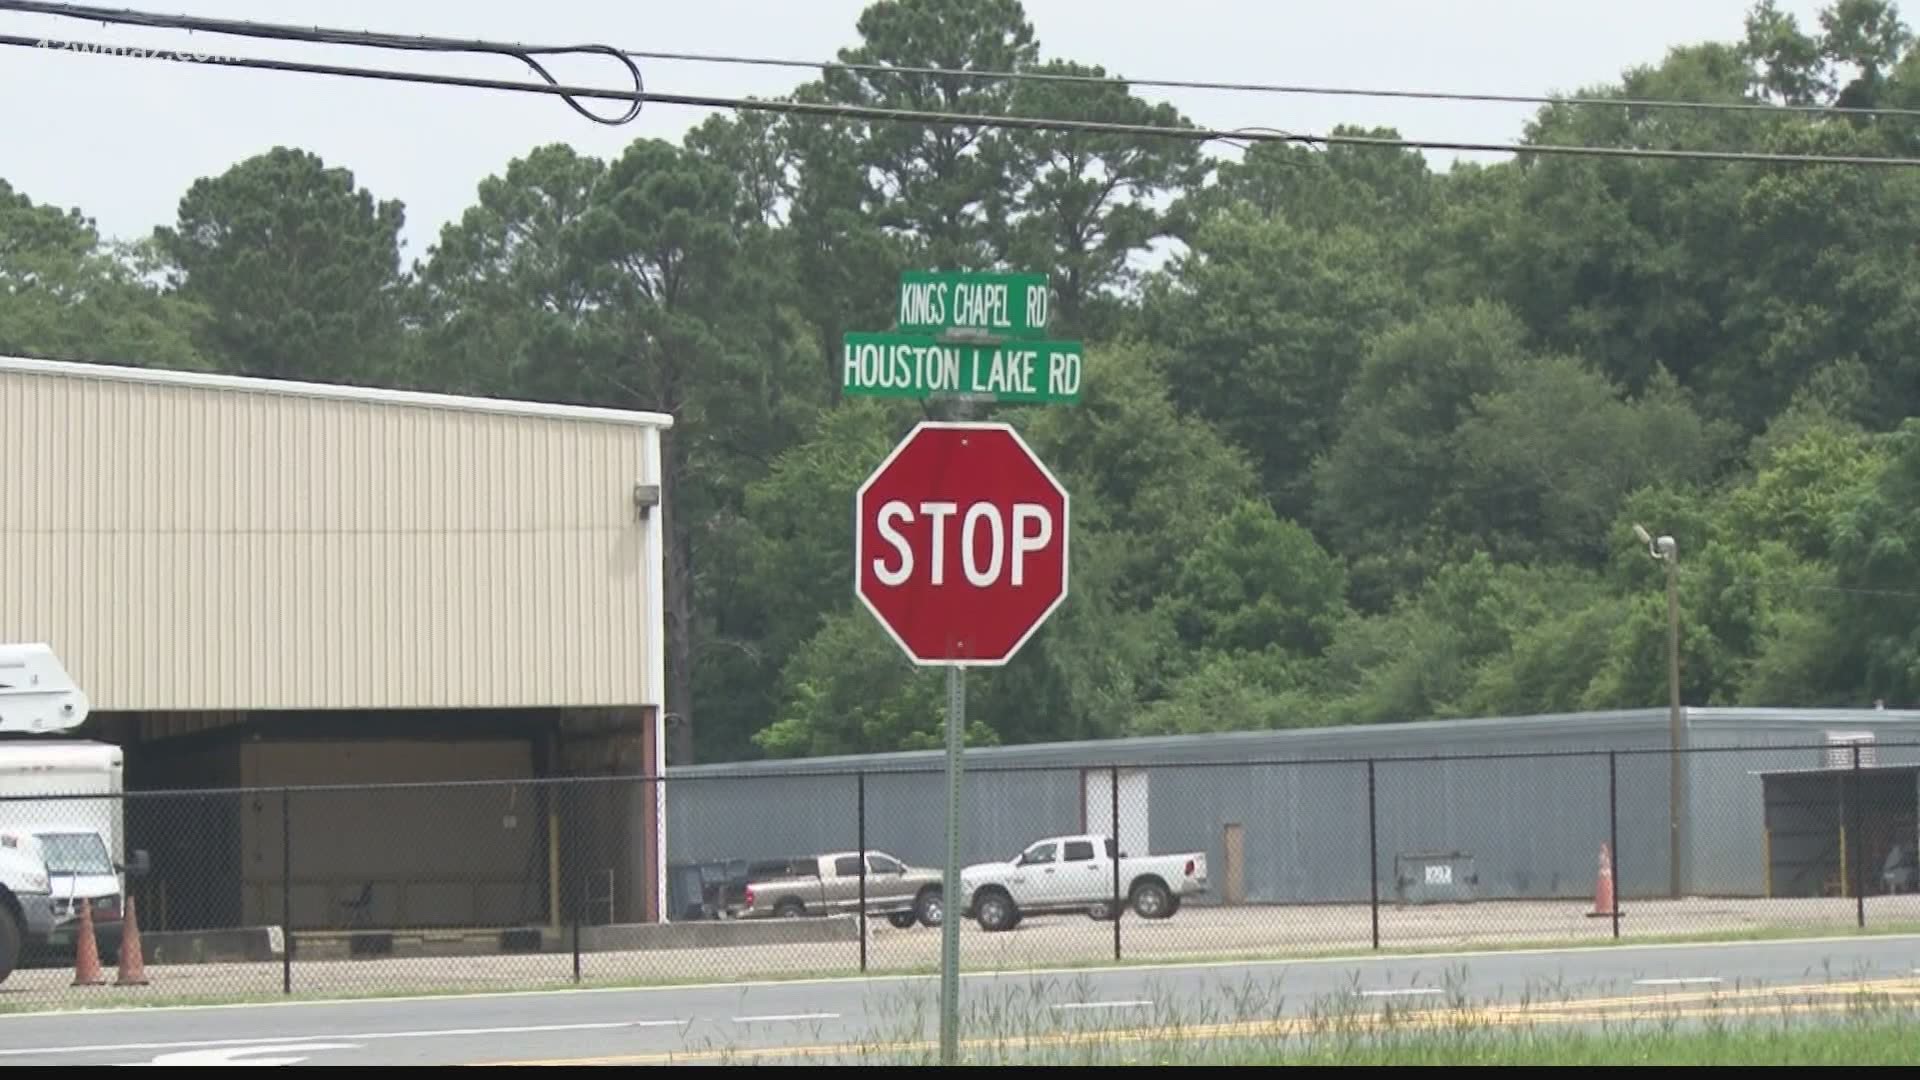 If you live in Houston County or travel through the area, you could see some big changes coming to a stretch of Houston Lake Road.